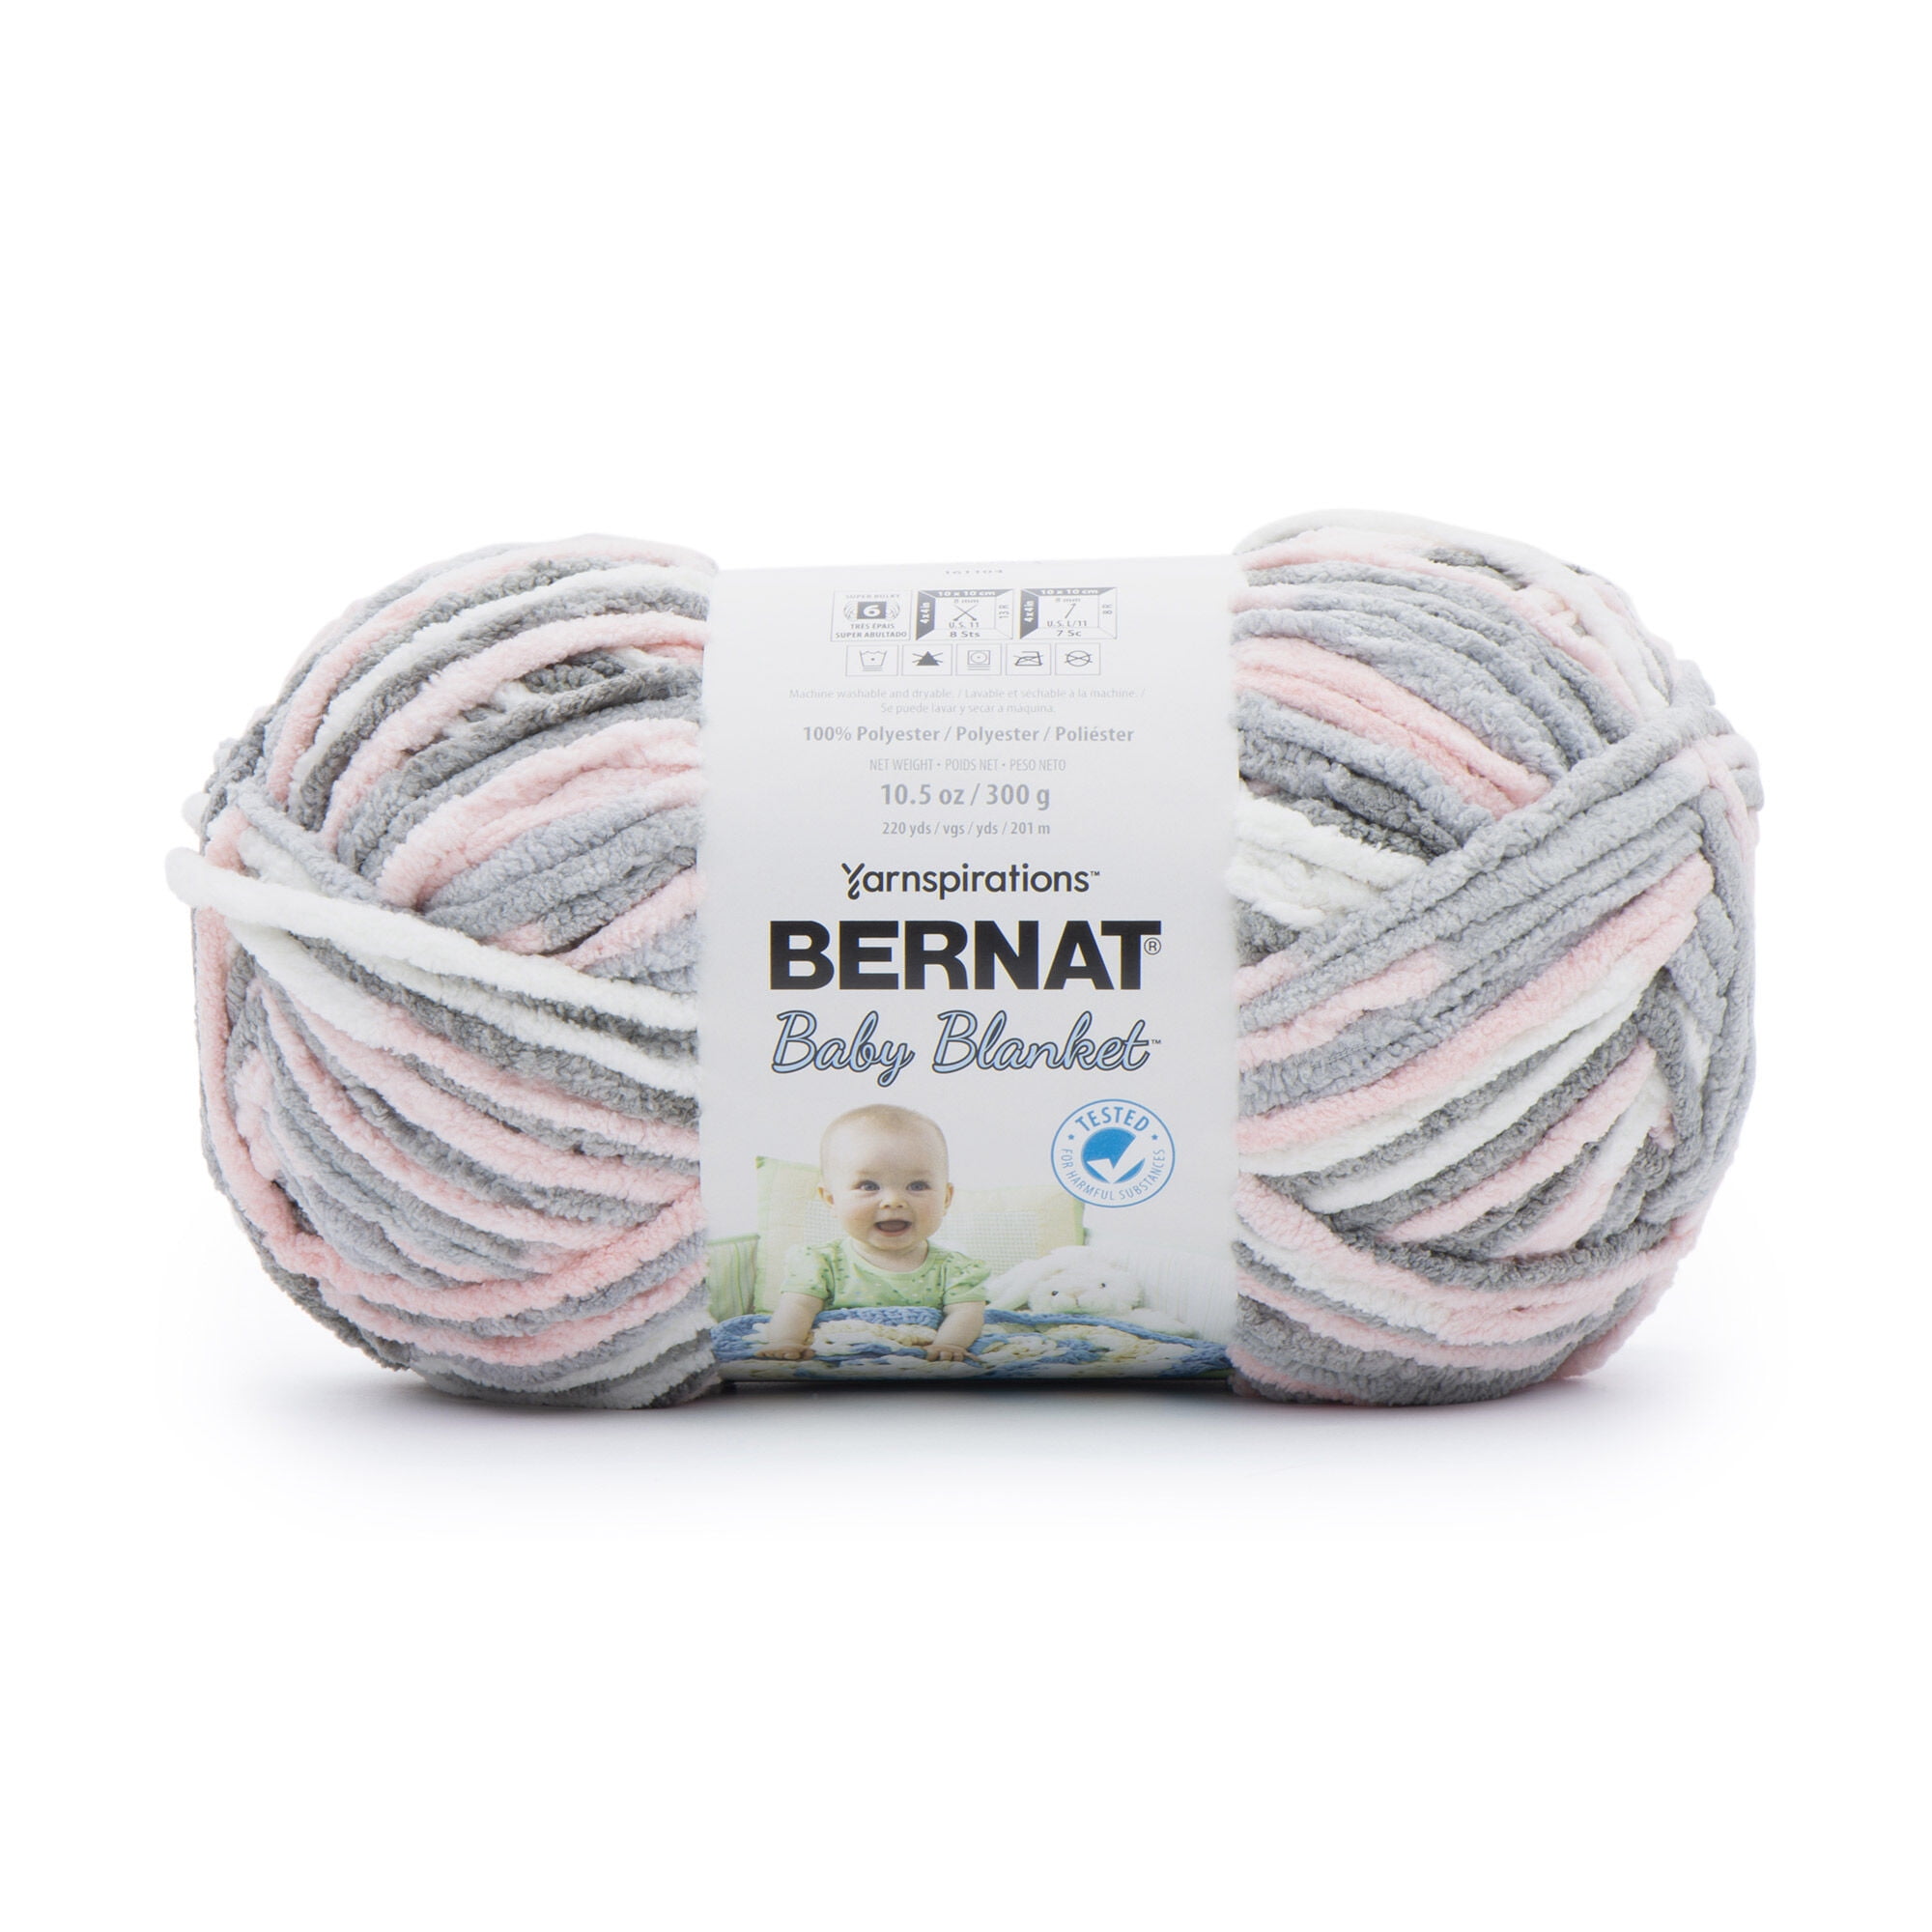  3PCS 300g Beginners Pink Yarn For Crocheting And